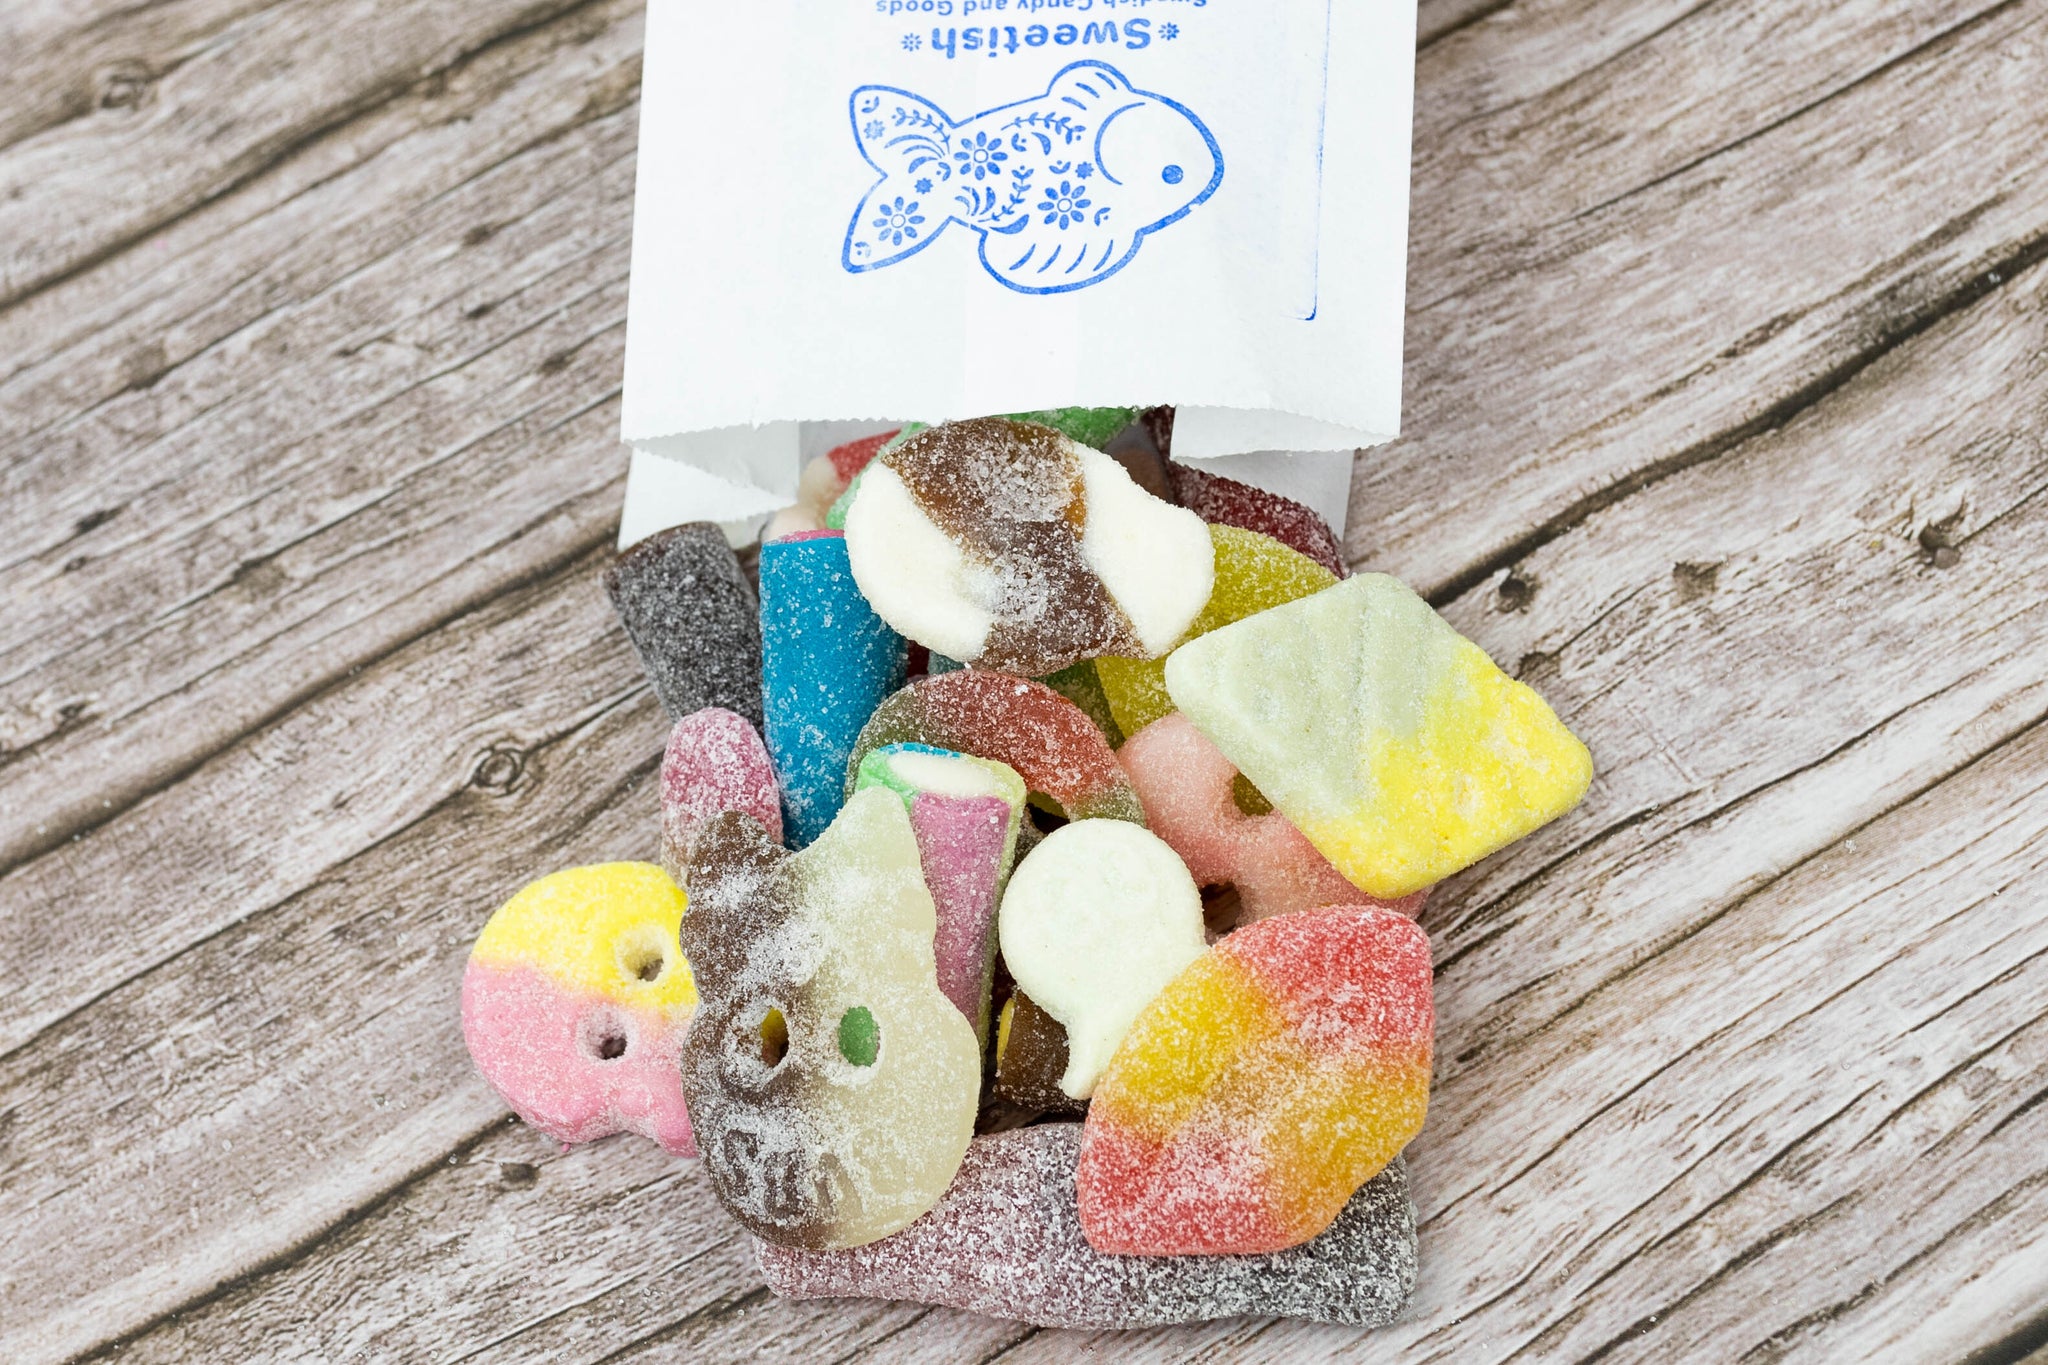 Pick-n-Mix - Sweetish Candy- Swedish Candy